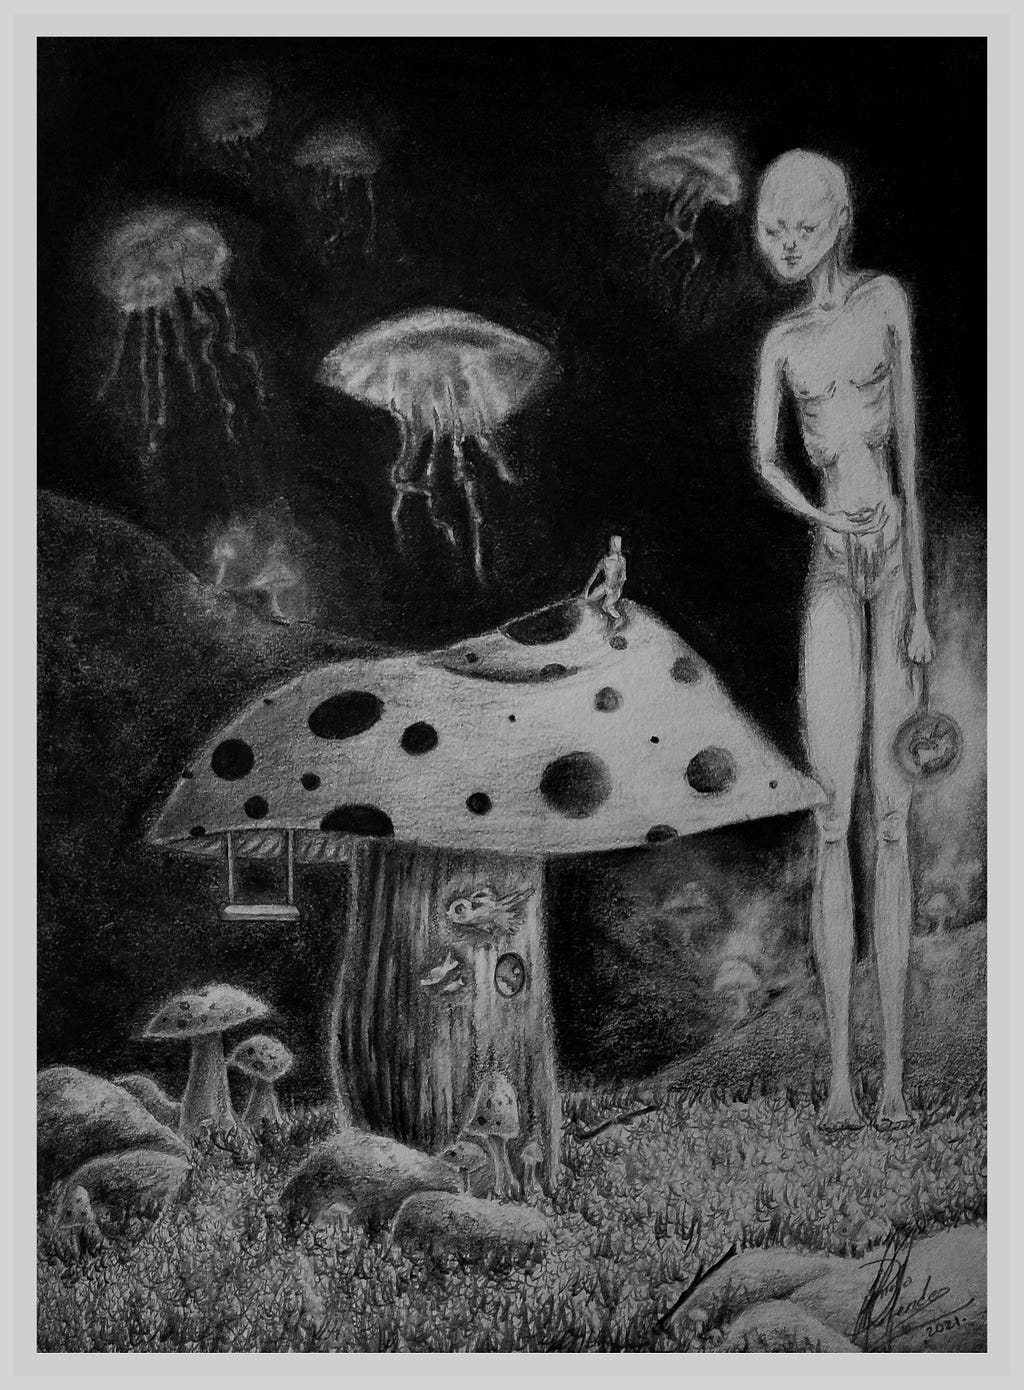 Black and white. Surrealistic piece made with pencil, in the front view there’s a giant mushroom on top of a grass field, a small opening in the root shows that this is also a house; this also has a swing, and a small person is sitting at the top of it. Looking to the right side, there is a large, lanky and pale figure holding a moon with the left hand and water on the other. The background shows deep waters filled with jellyfishes and glowing water mushrooms as well.